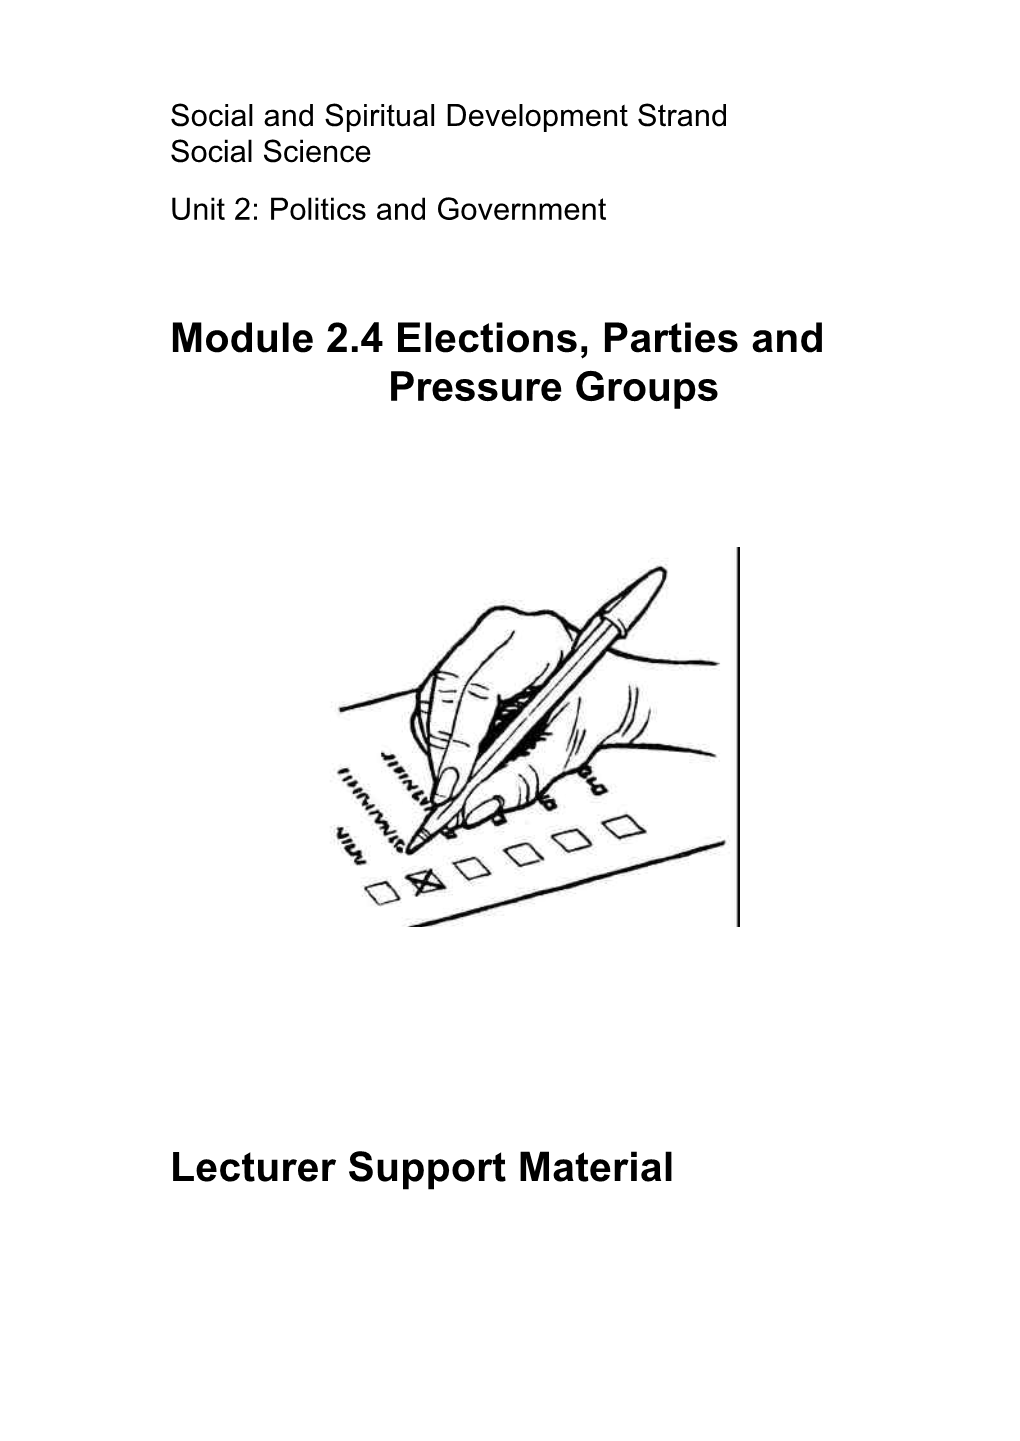 SS 2.4 Elections Parties & Pressure Groups Lecturer